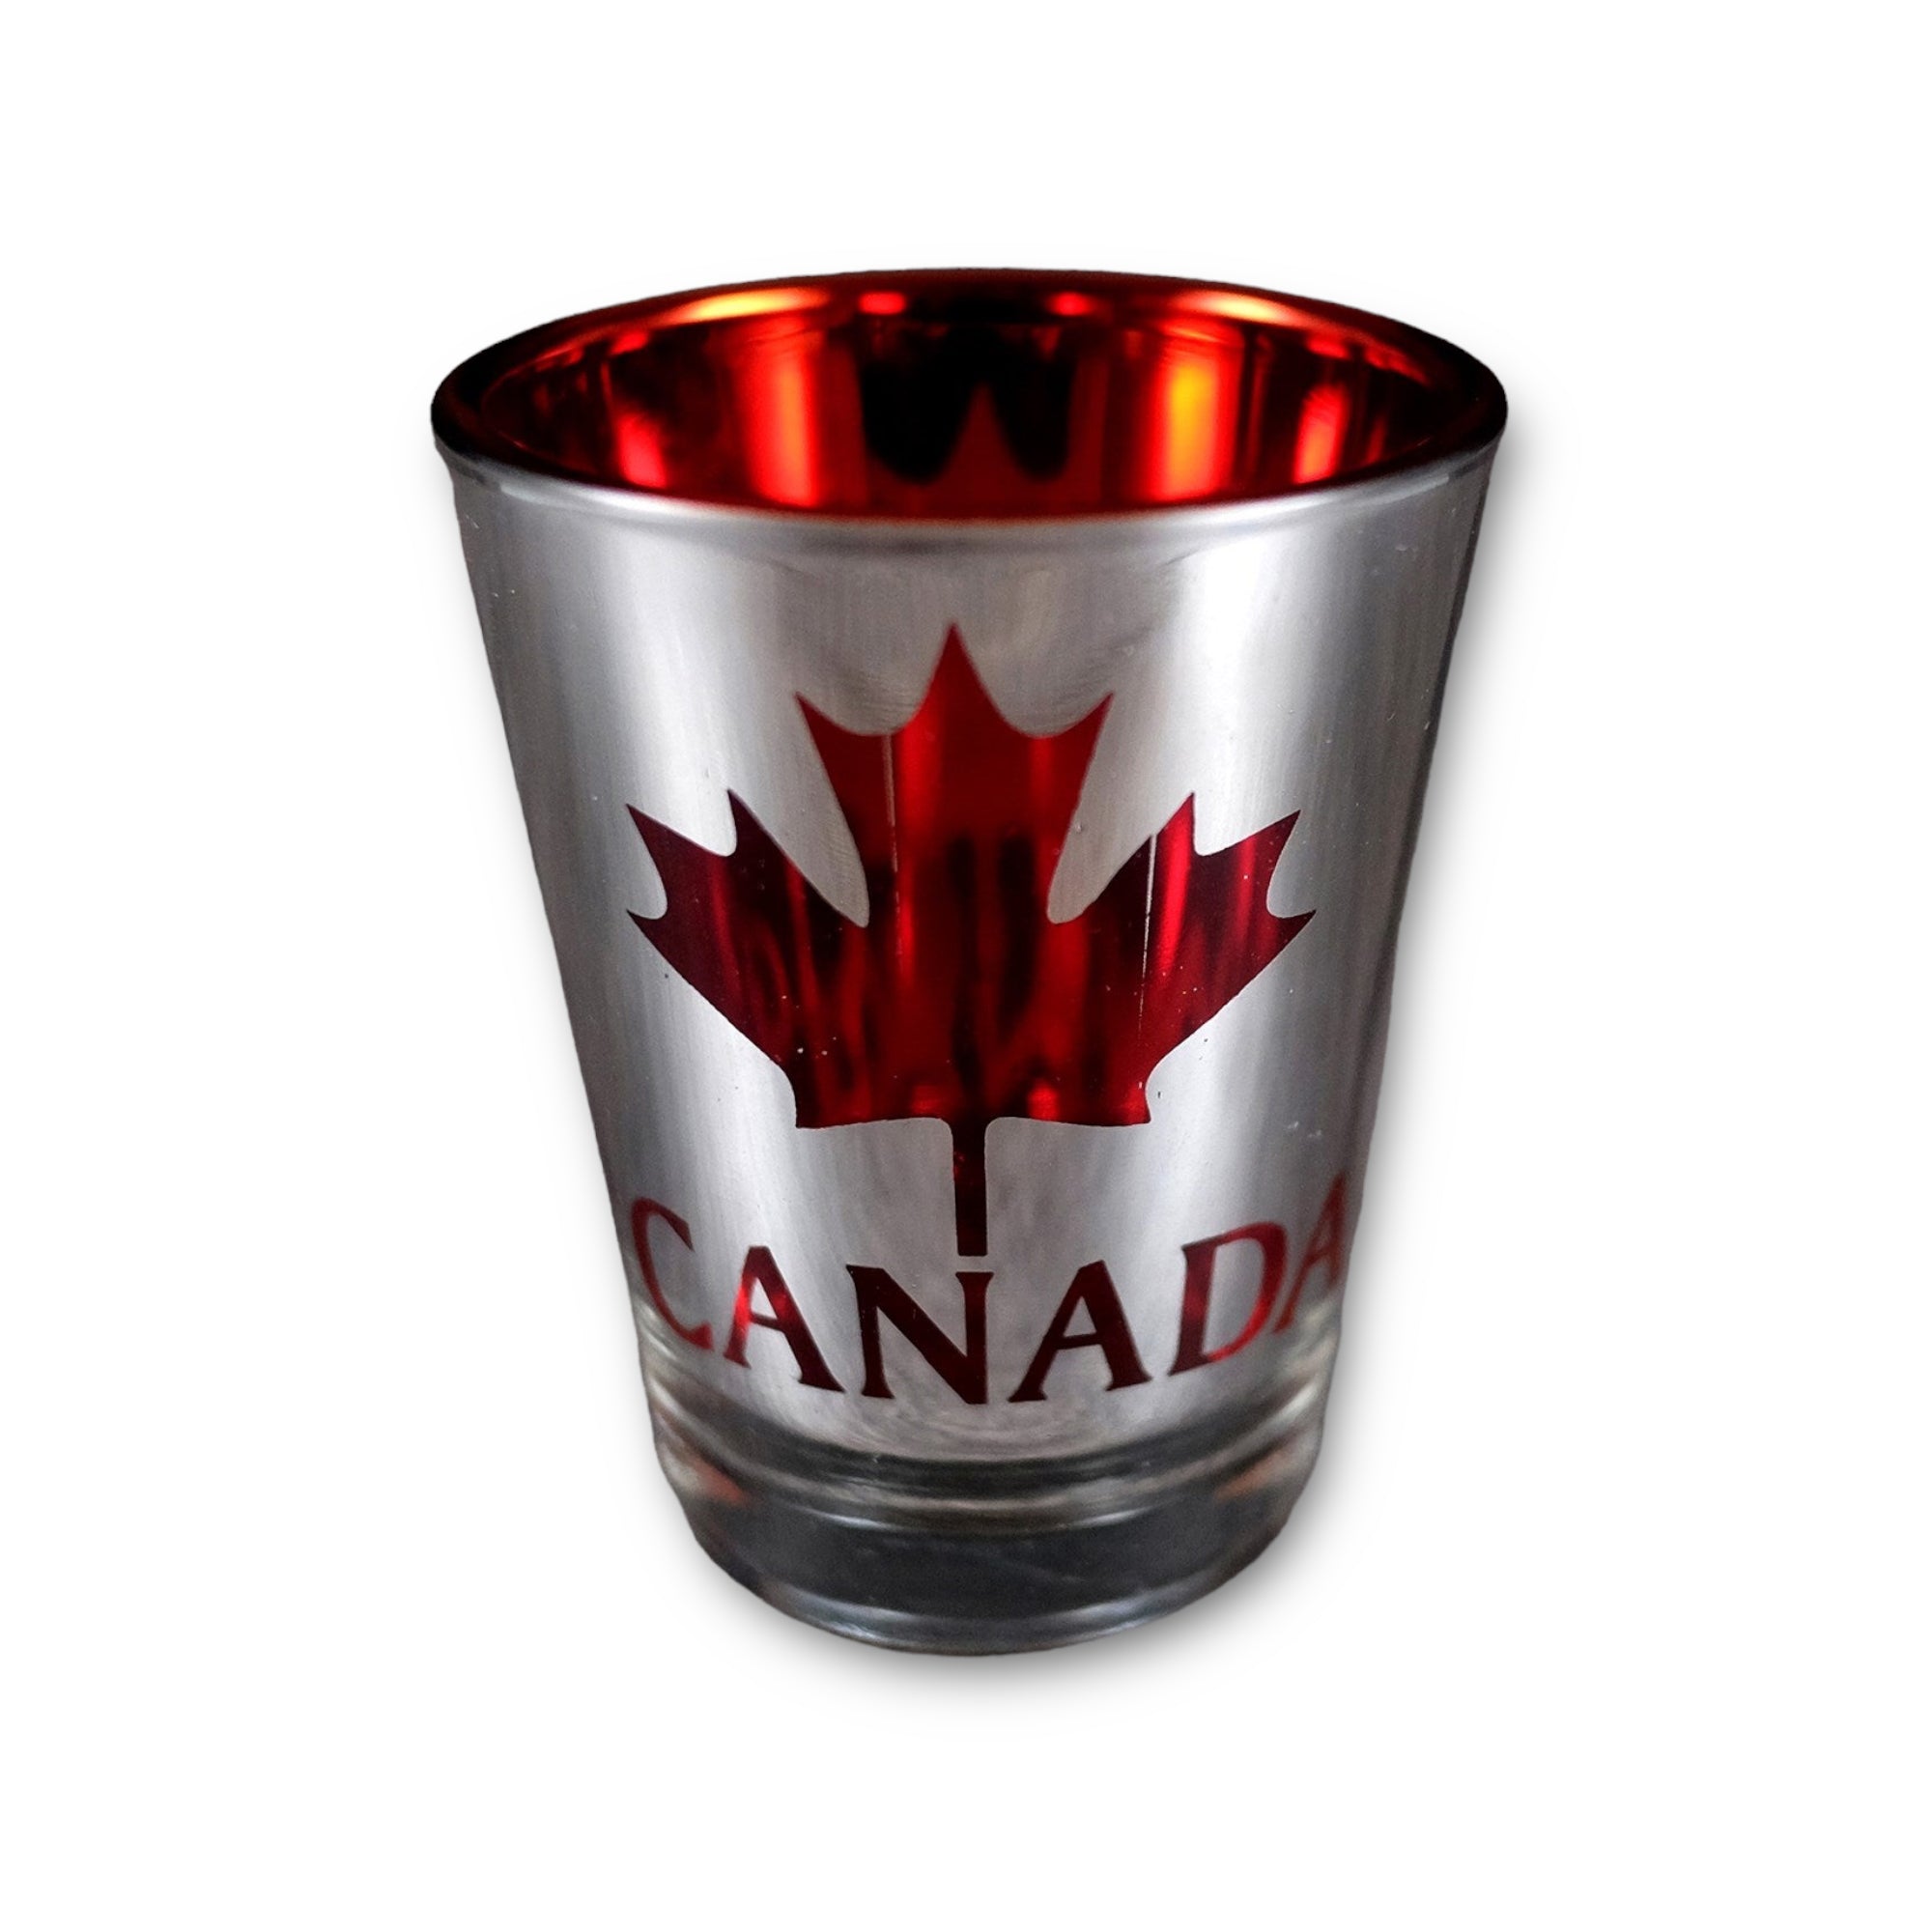 CANADA SHOT GLASS SILVER/RED